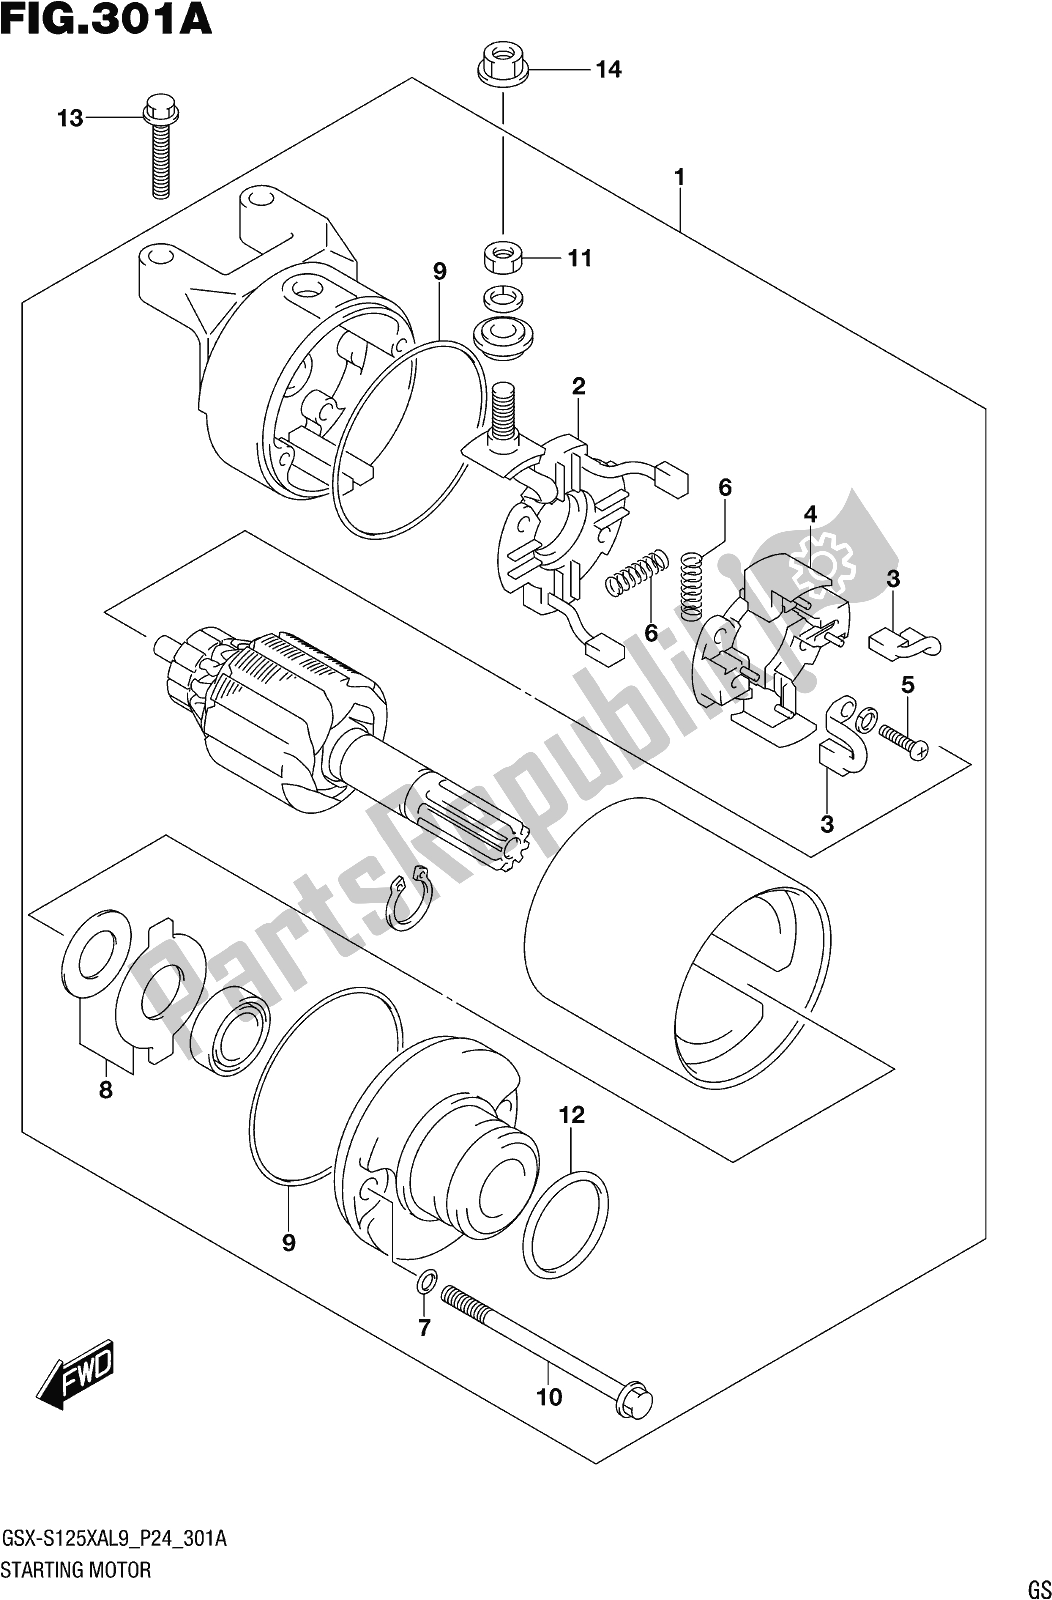 All parts for the Fig. 301a Starting Motor of the Suzuki Gsx-s 125 XA 2019